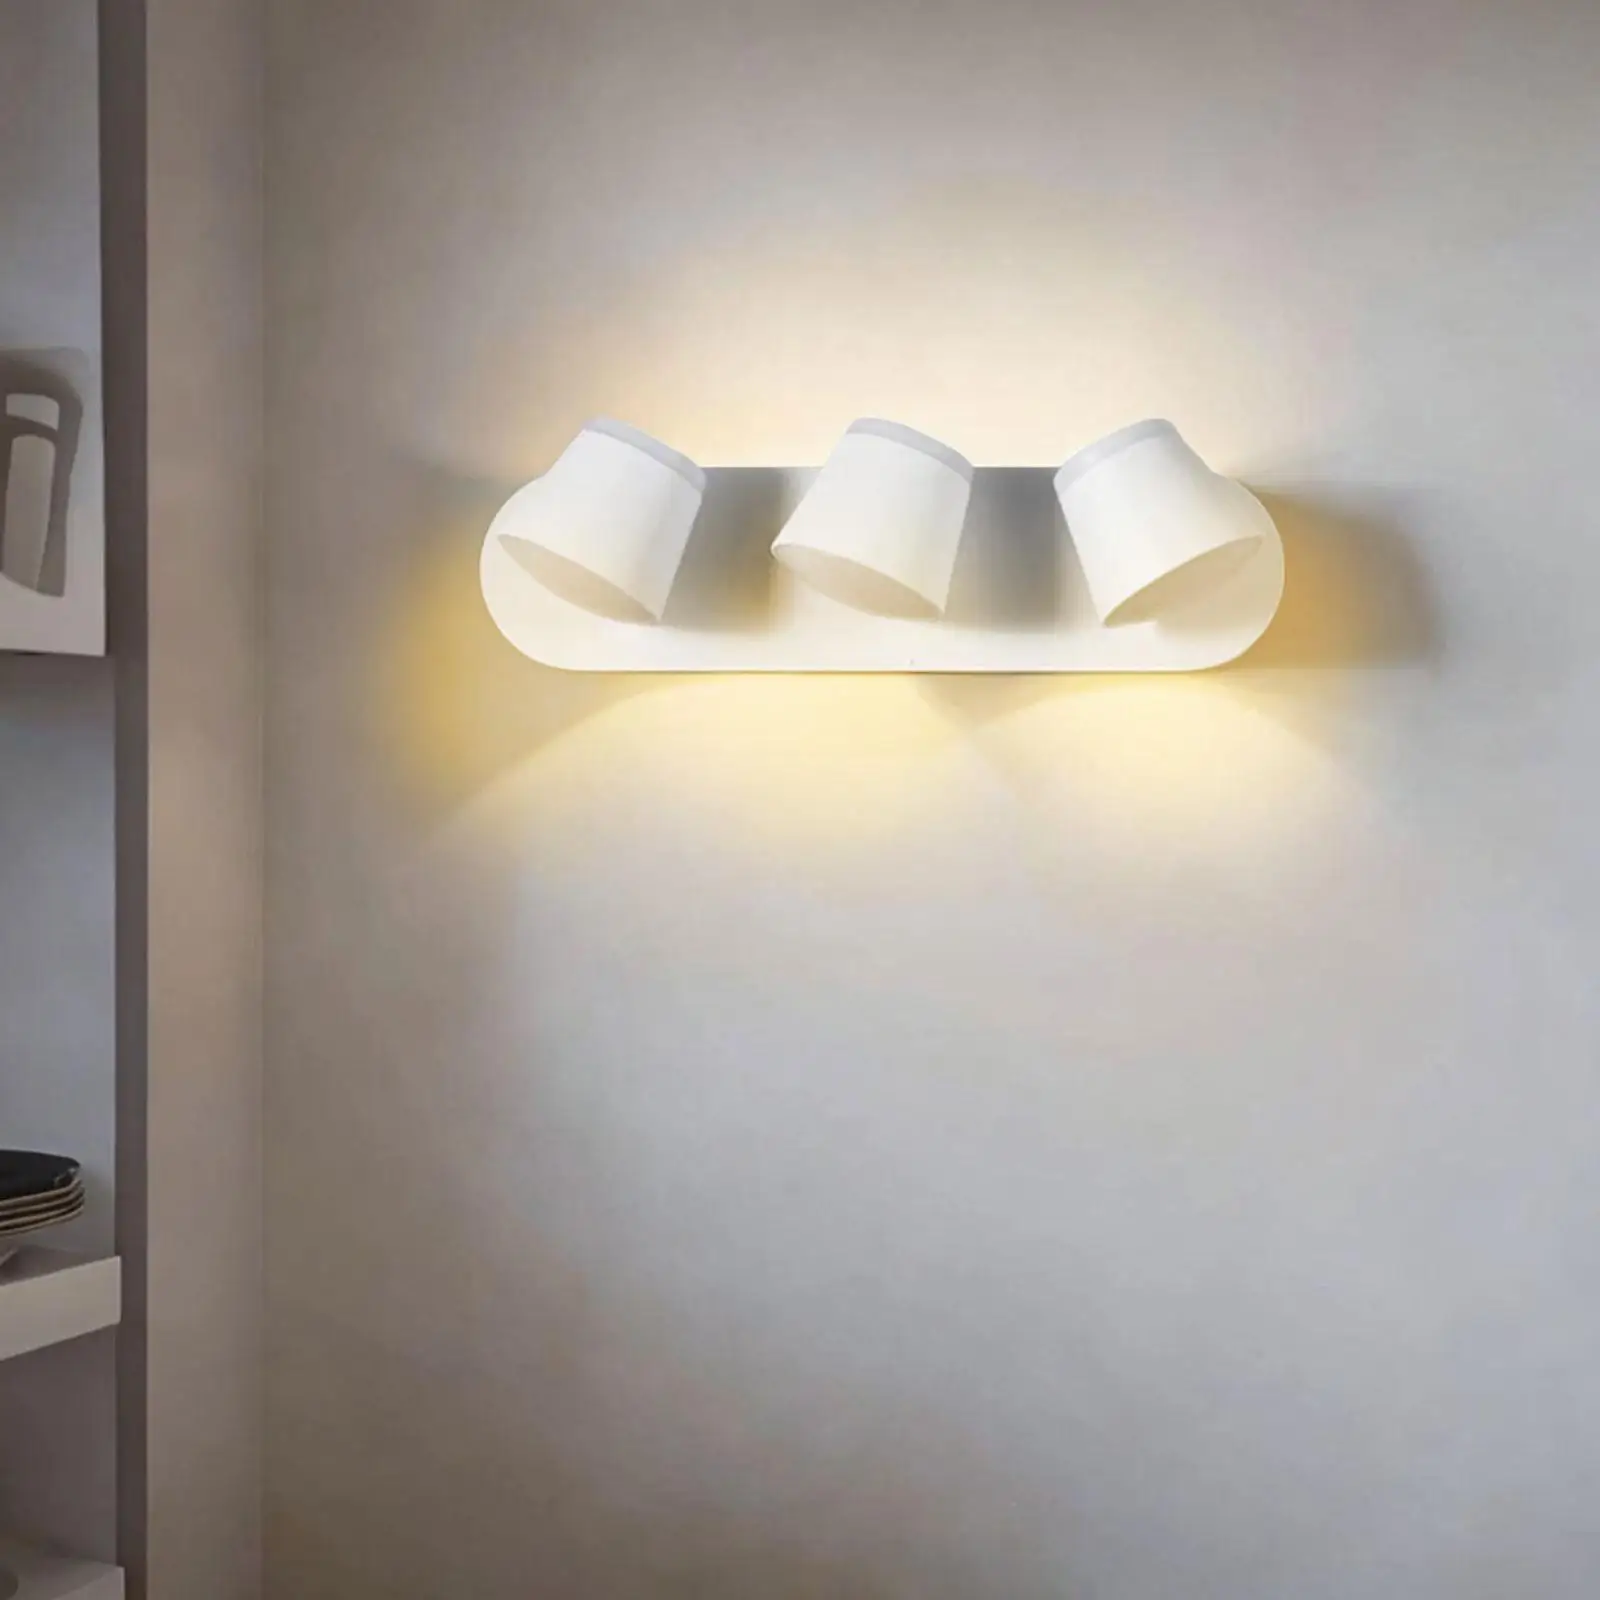 LED Wall Sconce Decorative Wall Light Modern Simple Bedside Lamps Adjustable